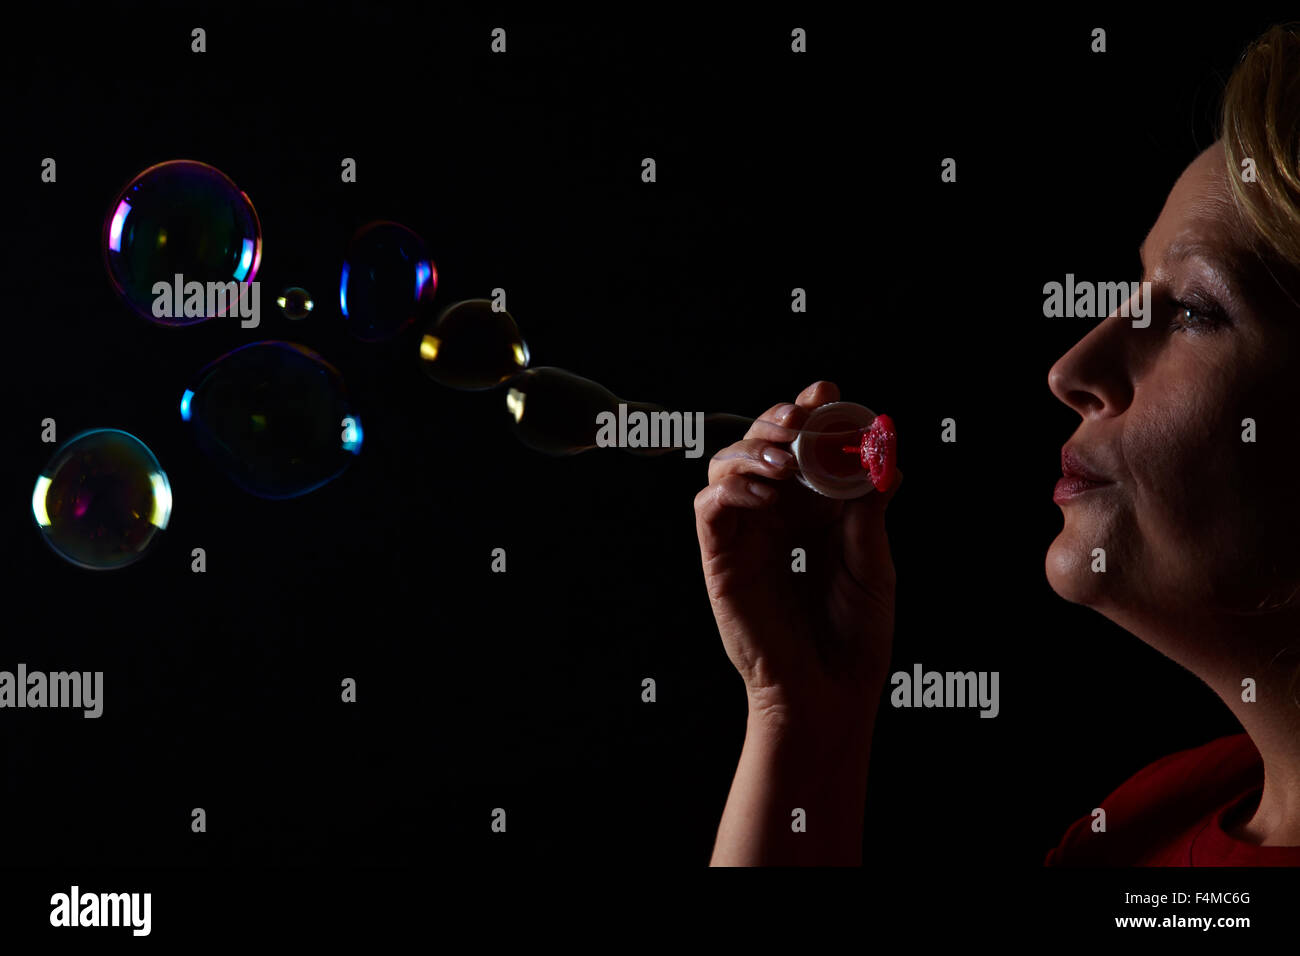 Woman blowing soap bubbles on black background Stock Photo